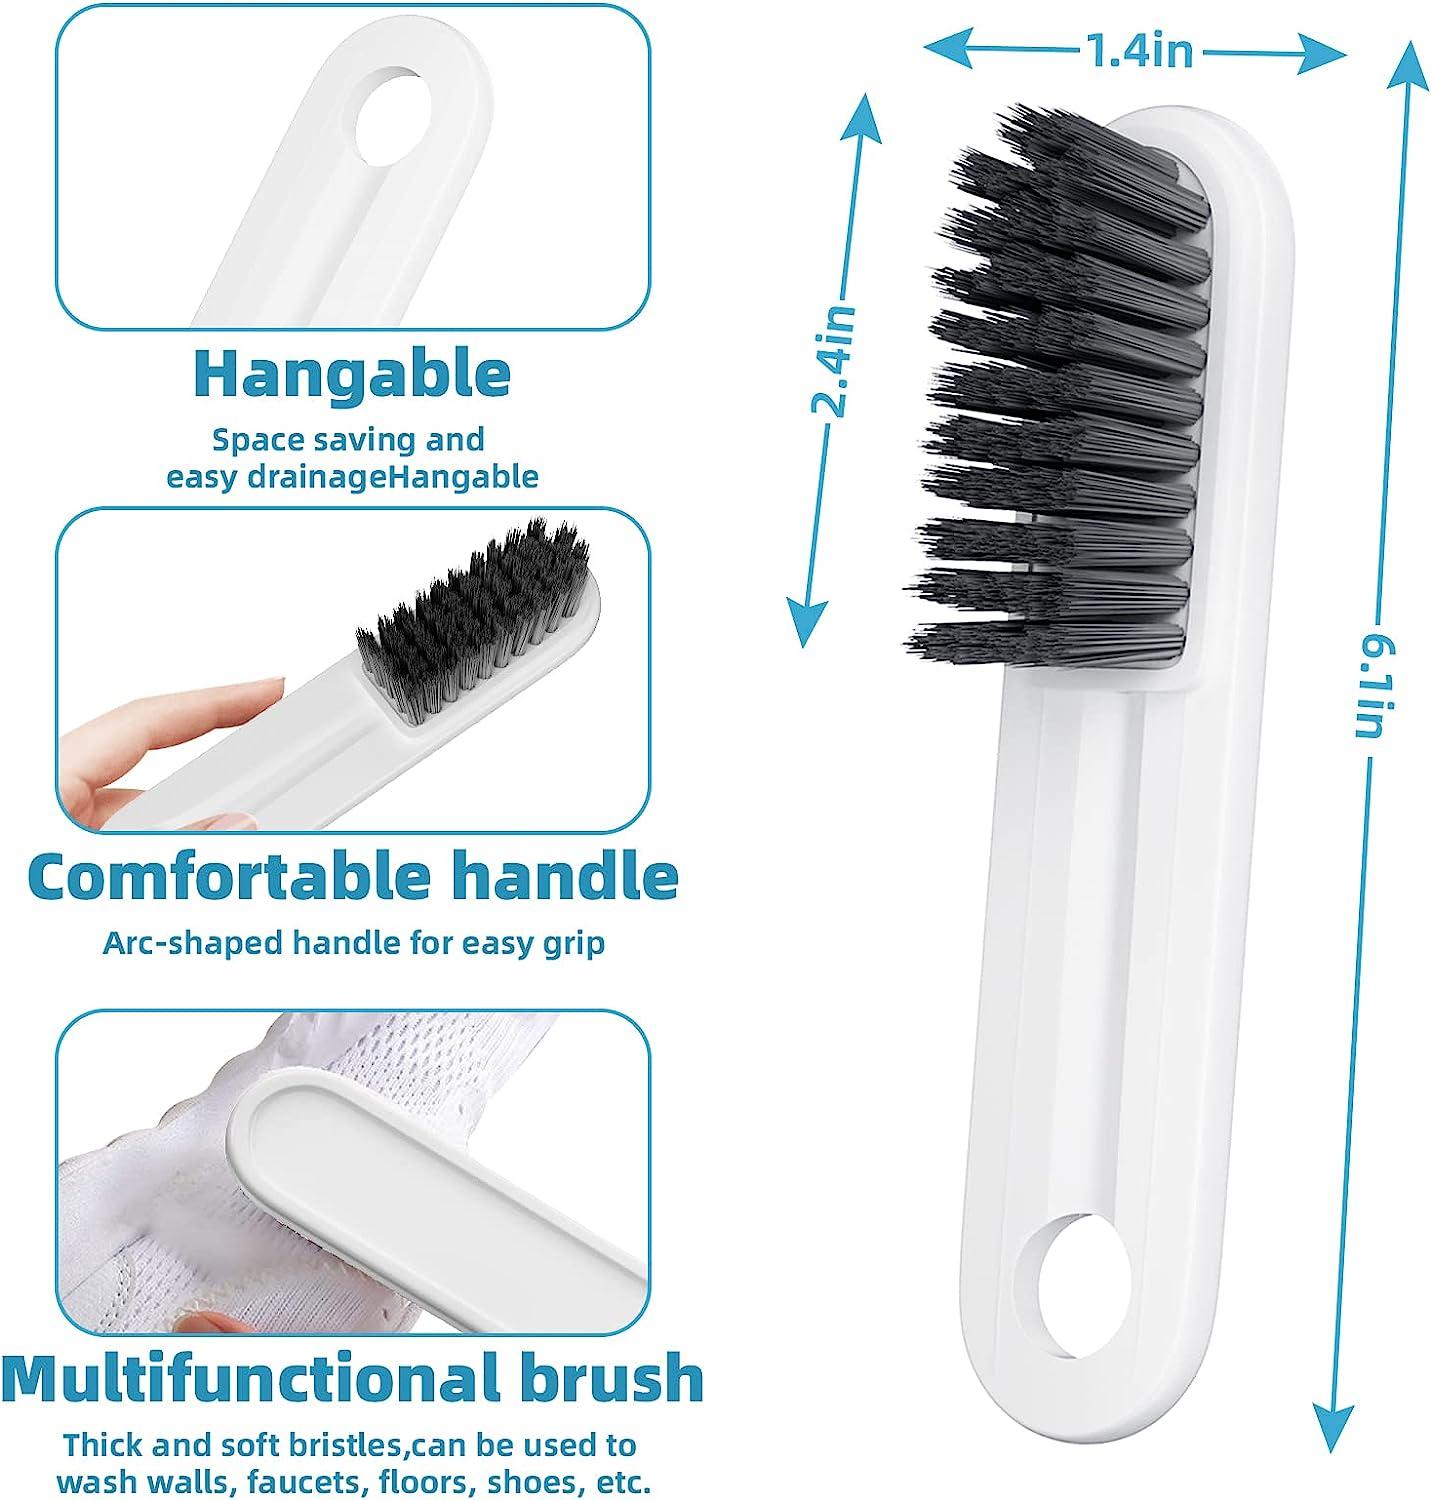 2-in-1 Multi-functional Cleaning Brush - Long Handle For Bathtub